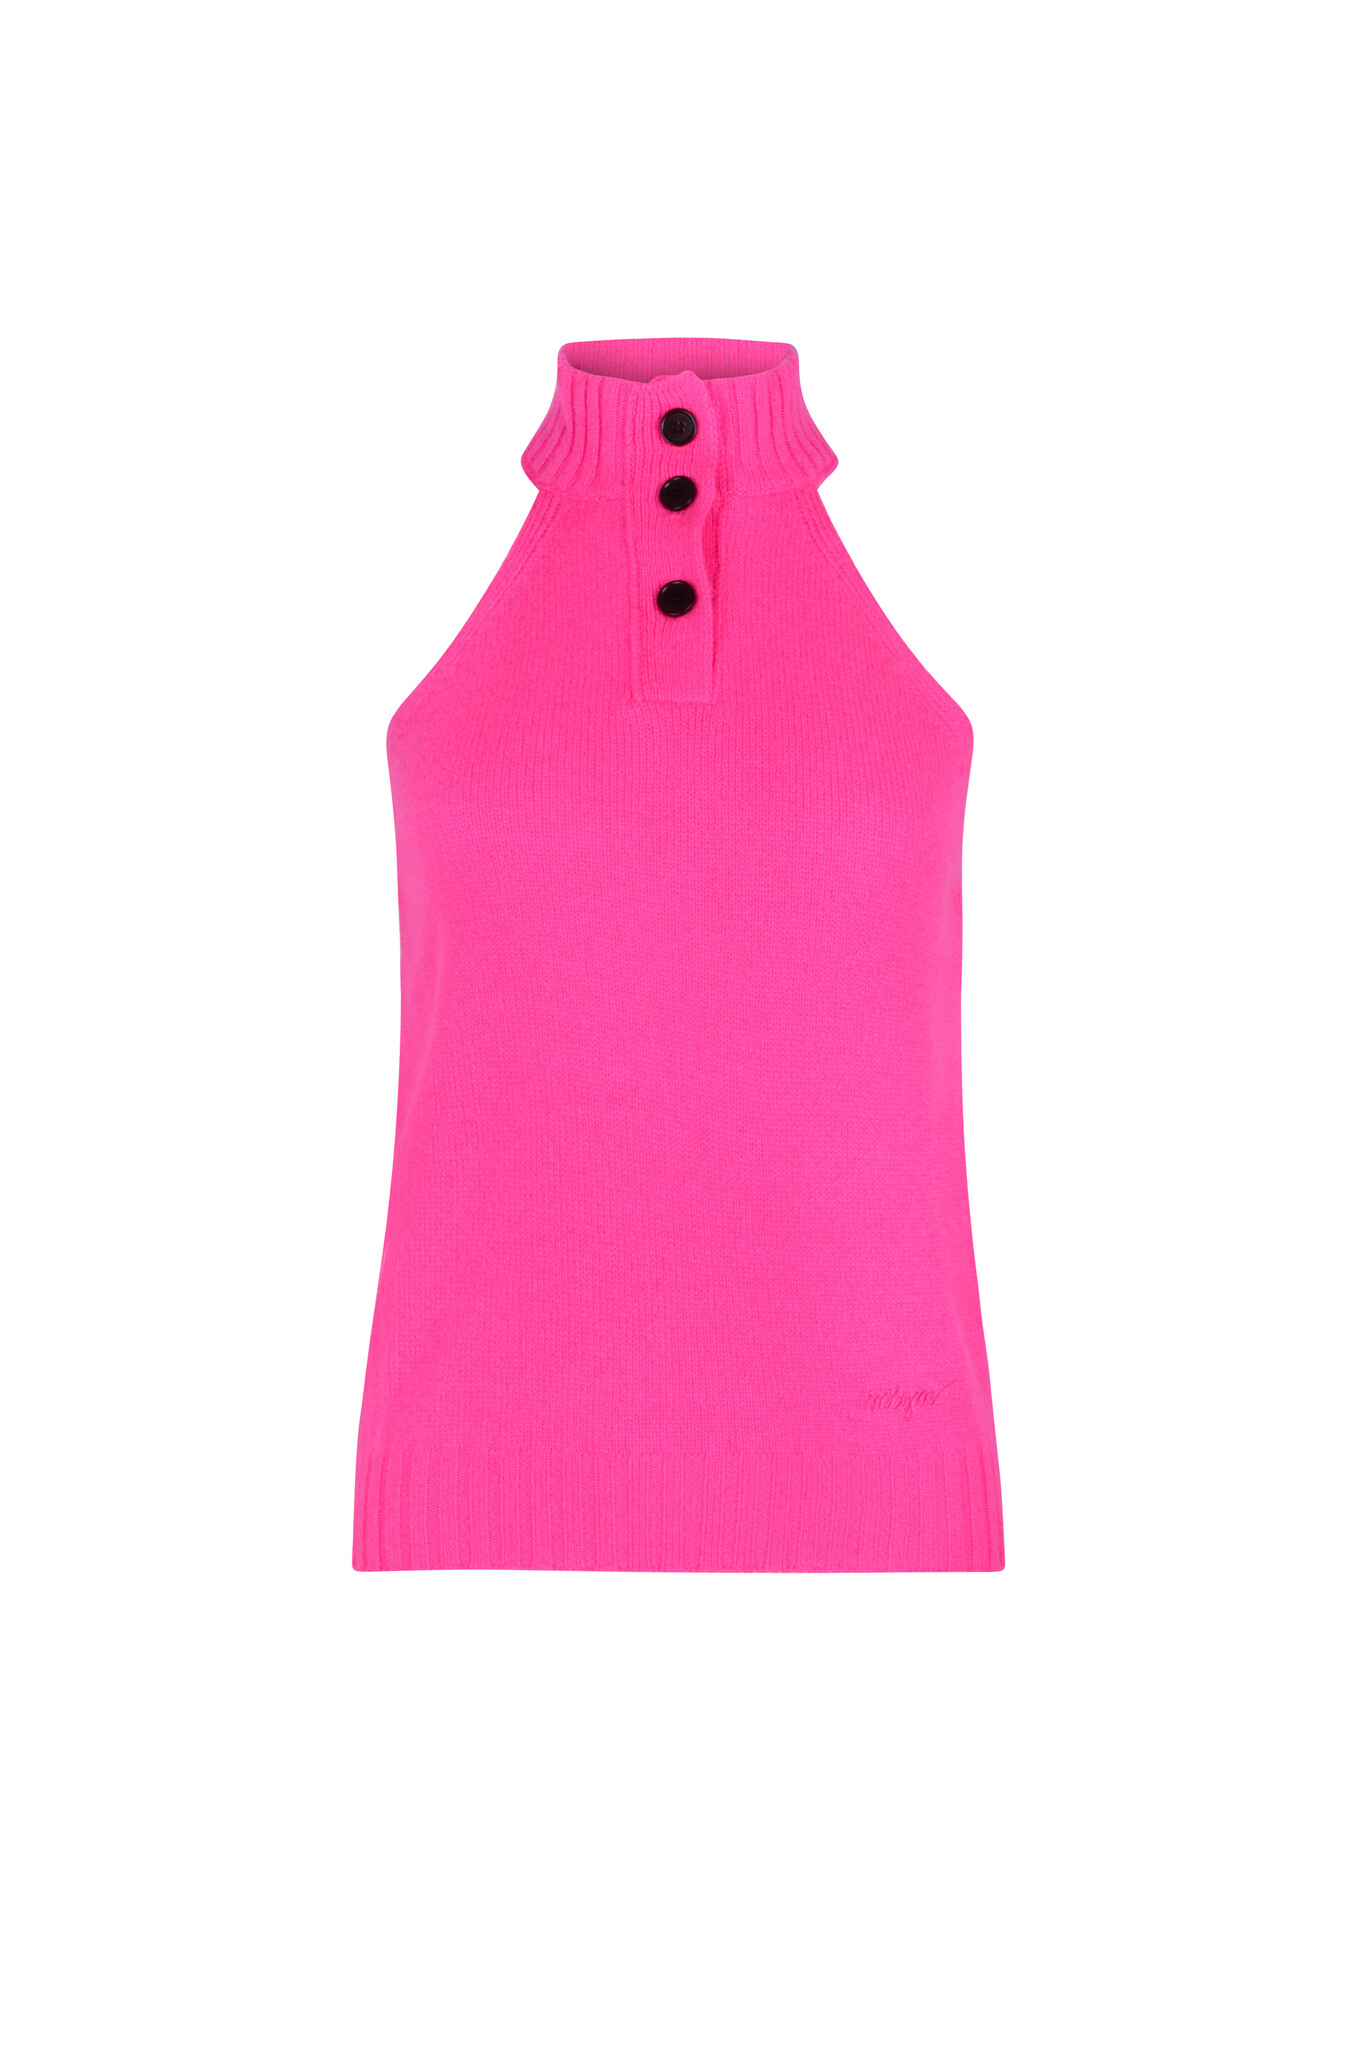 Cold Shoulder Top in Bright Pink-1